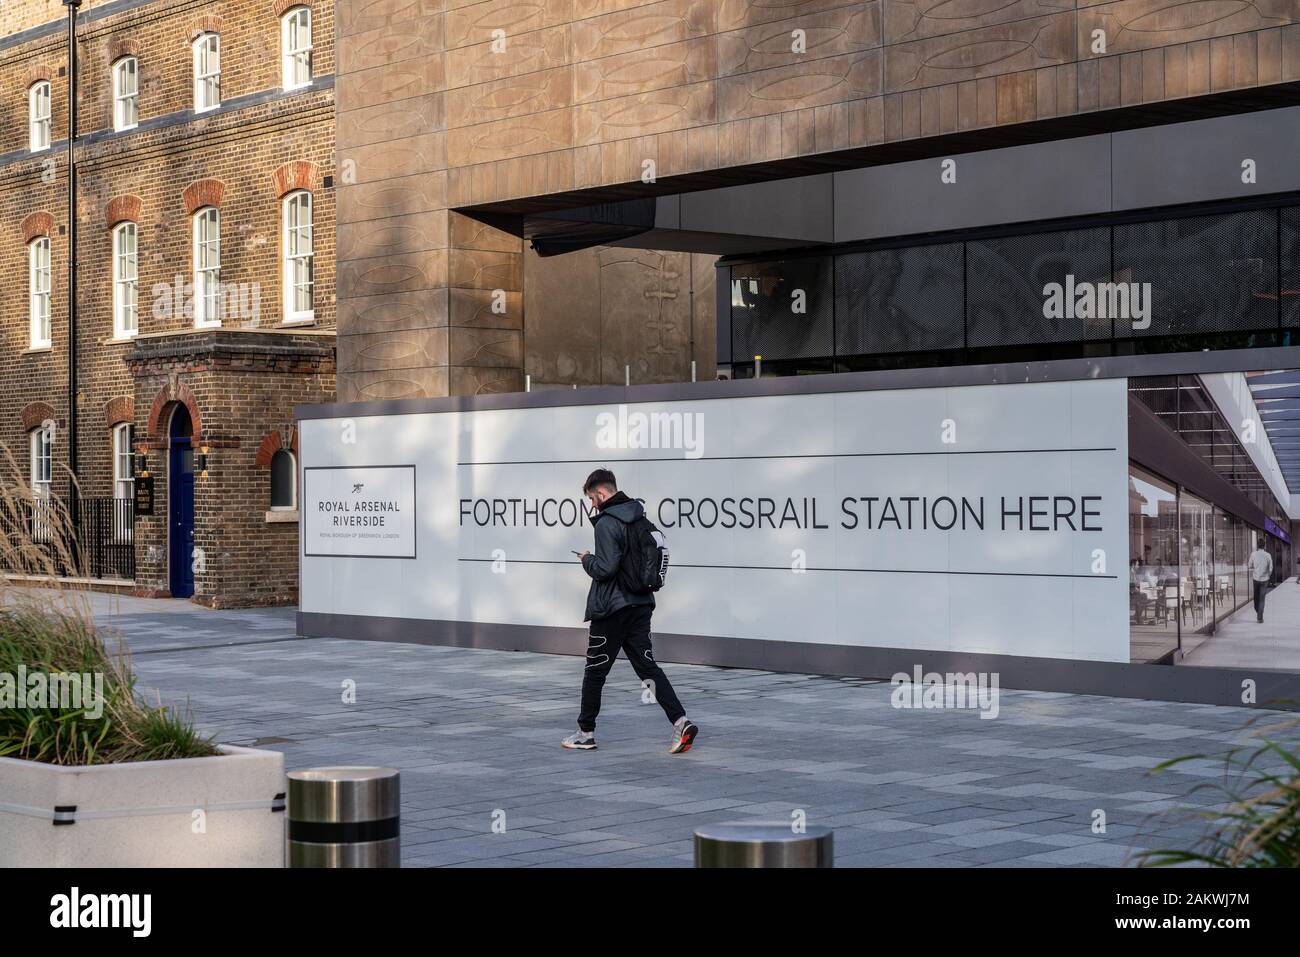 Woolwich, UK - 4 October 2019: Entrance to the Crossrail station under construction at Woolwich in London Stock Photo